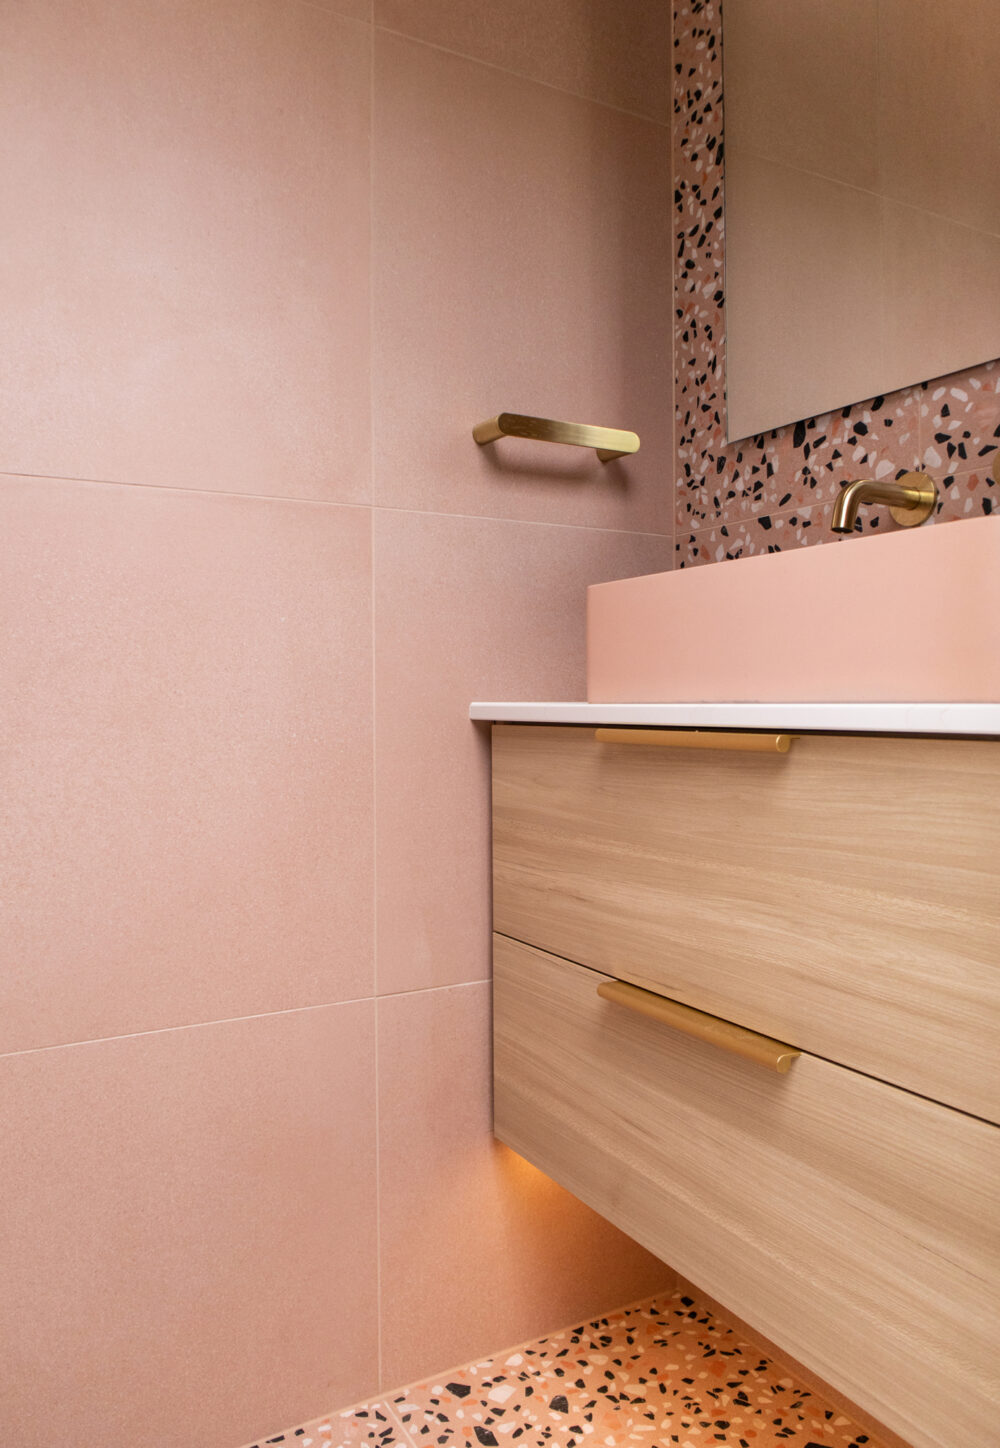 FLOOR &amp; FEATURE WALL TILES: Medley Classic Pink (Order In)
WALL TILES: Medley Minimal Pink (Order In)